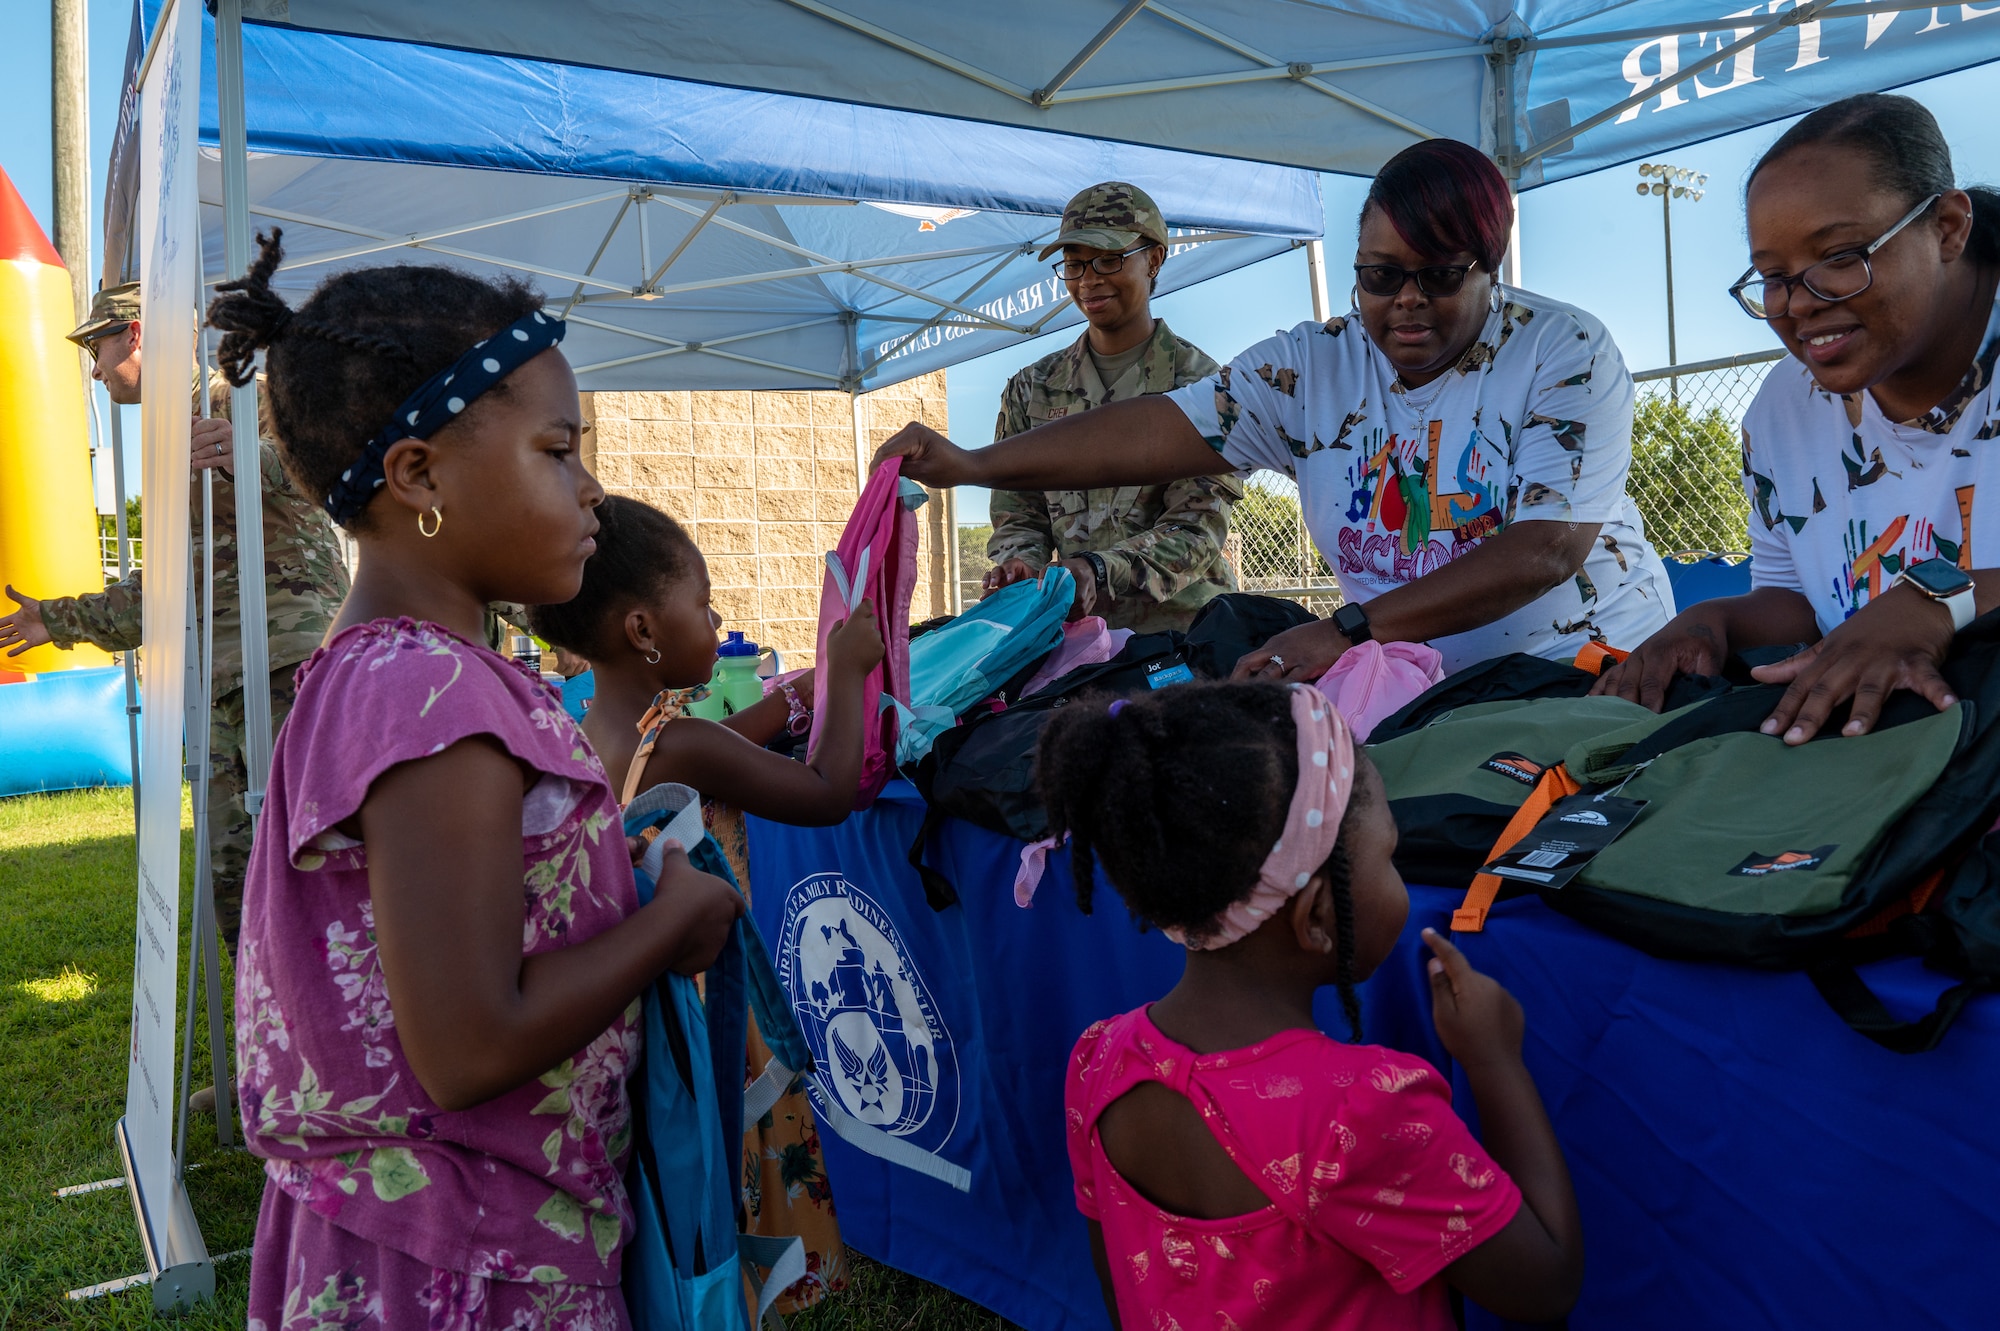 Children select a backpack from a table of school supplies during a back to school field day event.